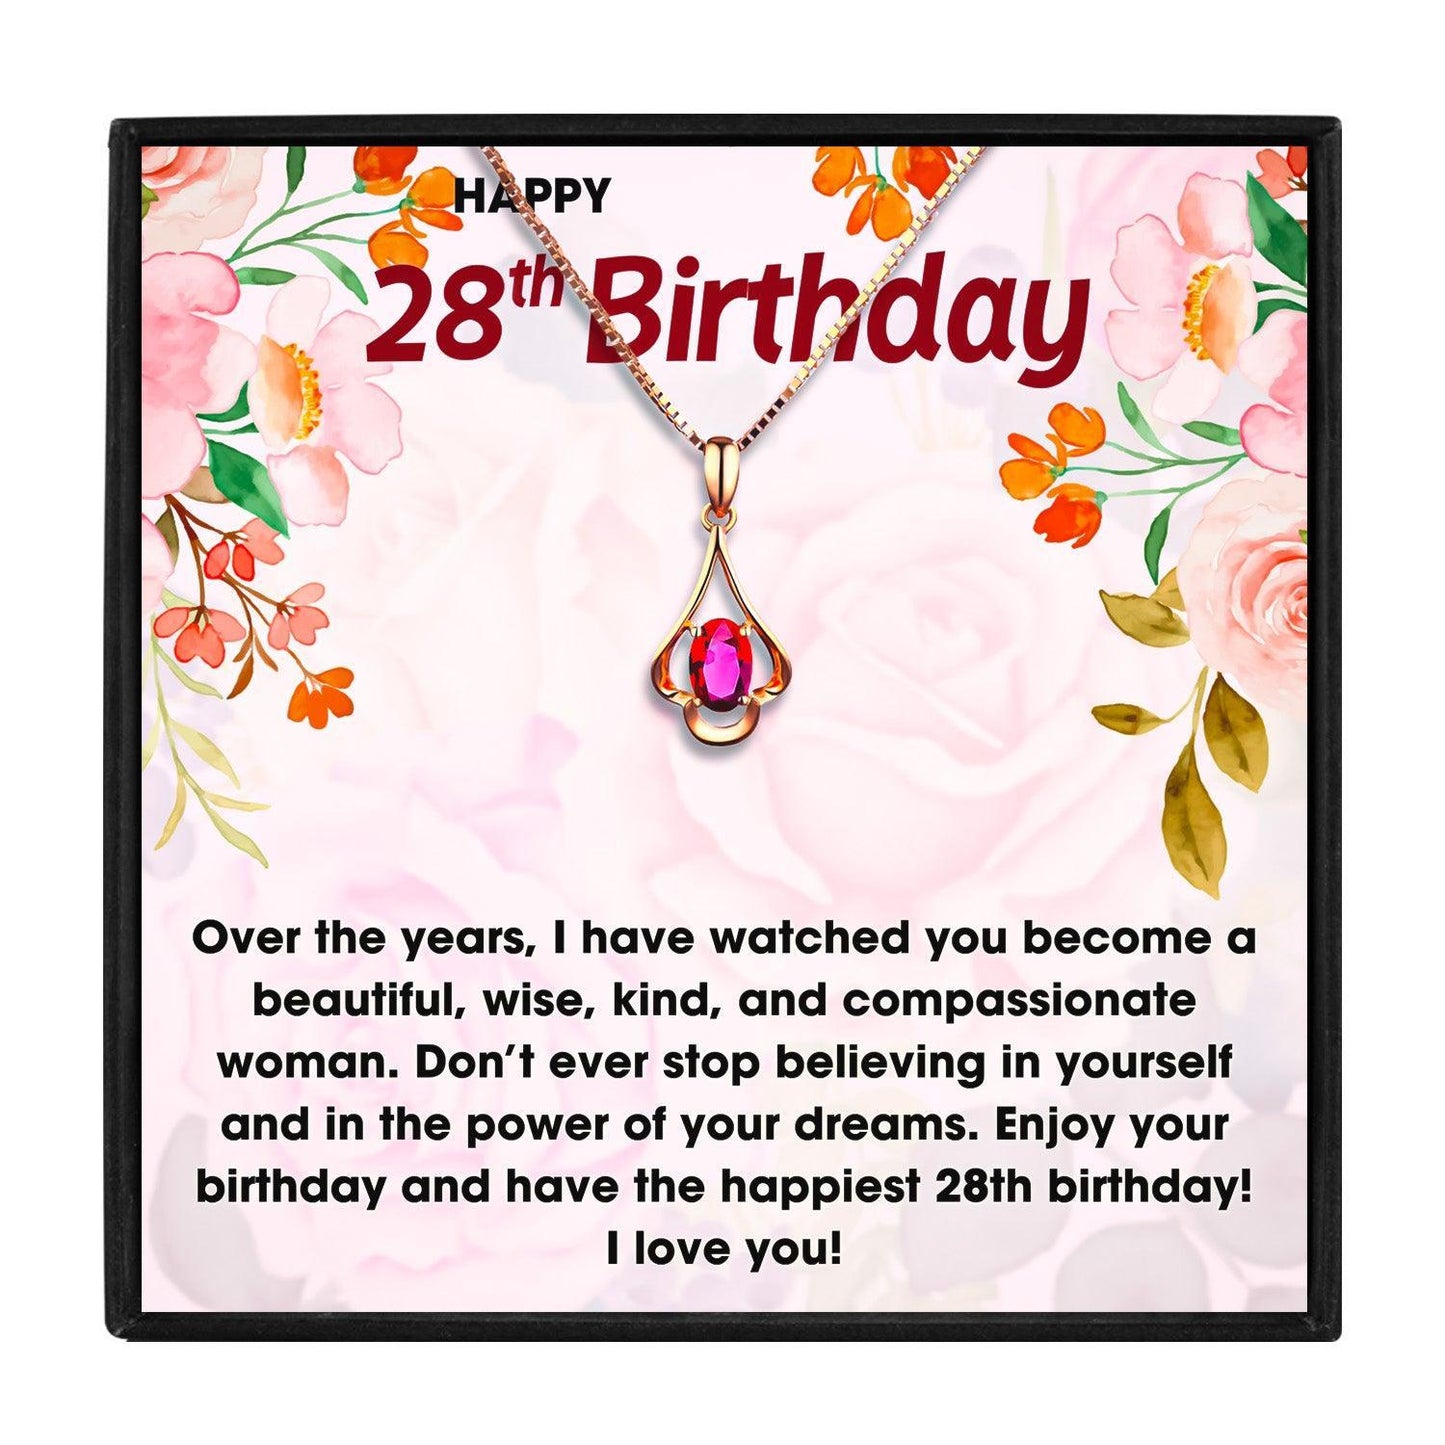 Birthday Ideas For 28 Year Old Women Or Girl in 2023 | Birthday Ideas For 28 Year Old Women Or Girl - undefined | 28 birthday gift, 28th birthday gift ideas for her, 28th birthday ideas for her, birthday ideas for 28 | From Hunny Life | hunnylife.com